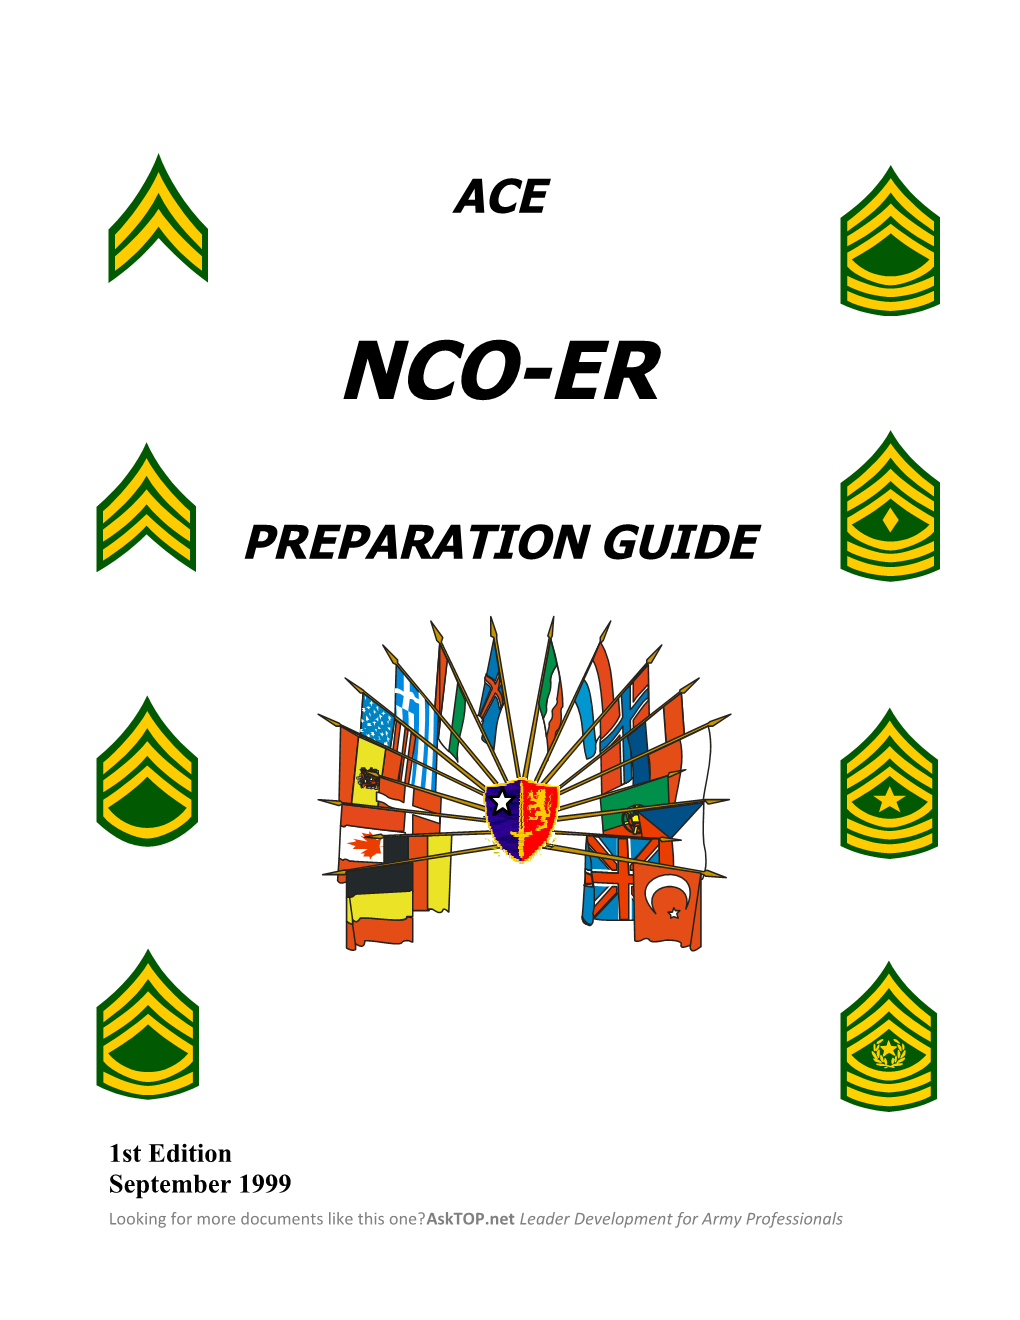 United States Army Elements, Ace